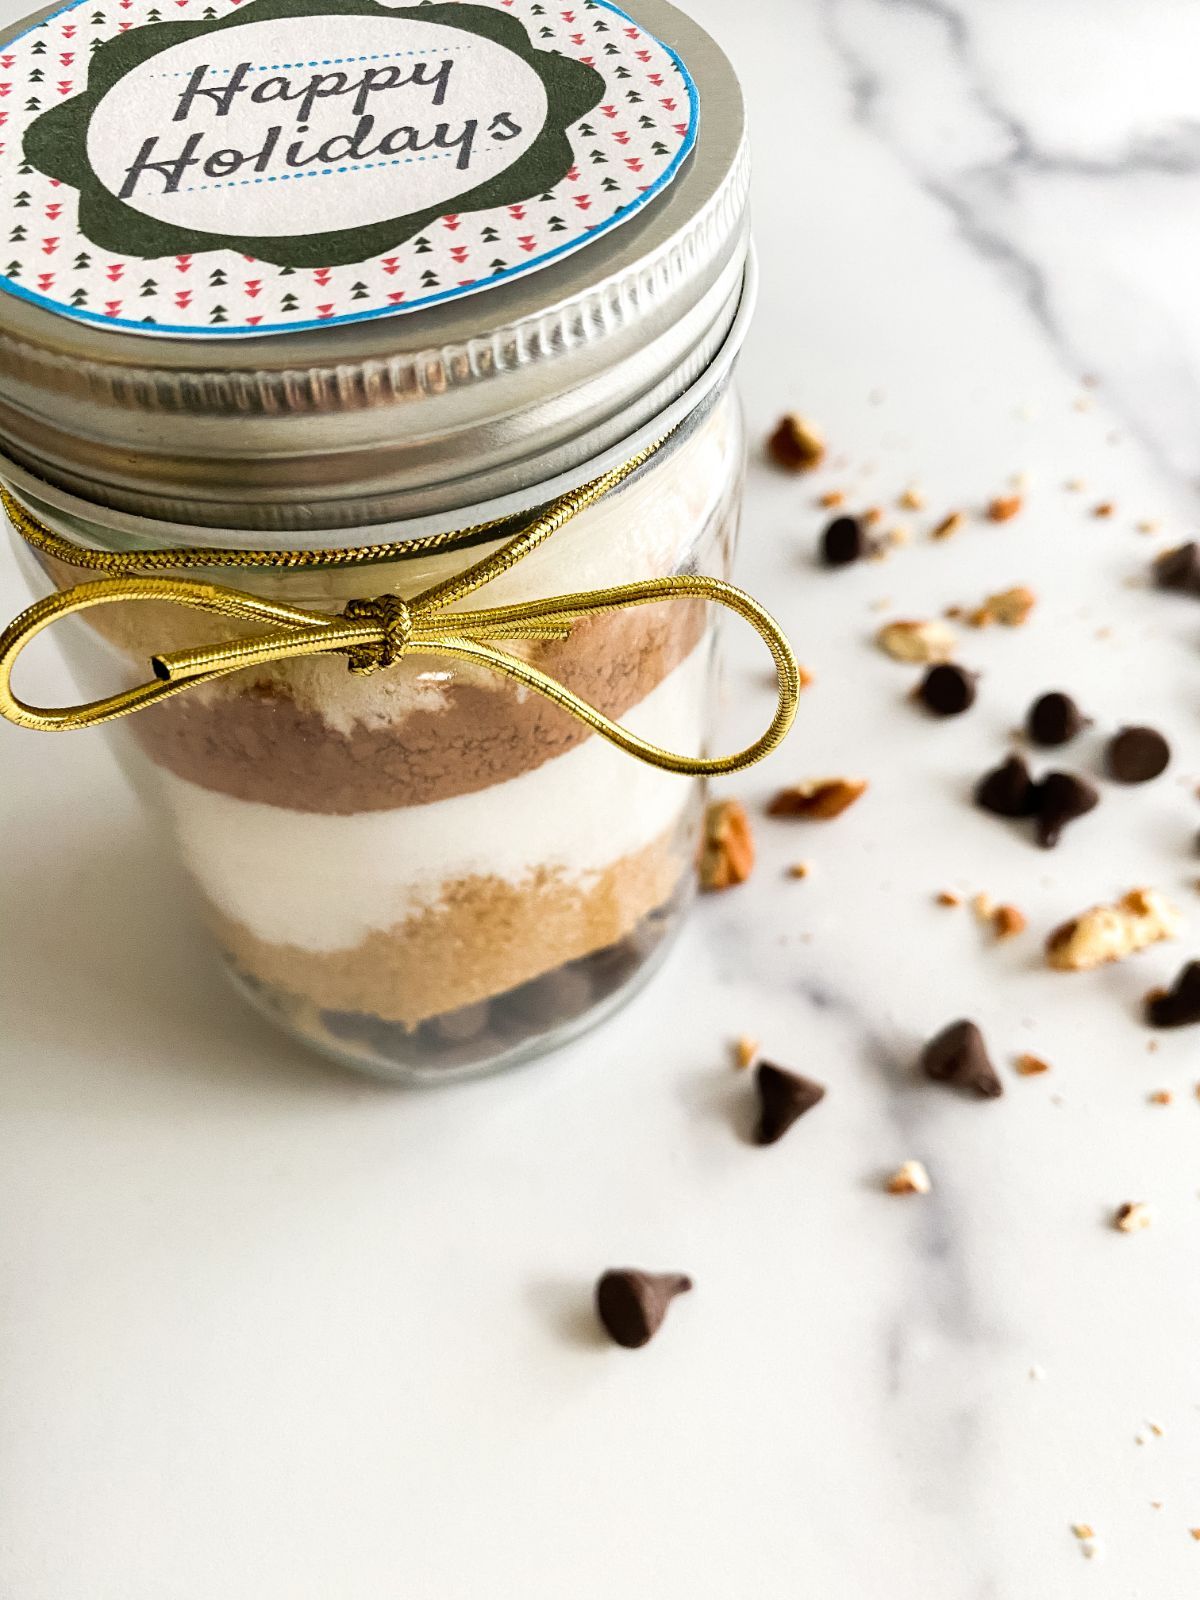 An angled shot of the Brownie Mix in a Jar showing a part of the text on top of the jar cover which reads Happy Holidays, and the side of the jar which showcases its layers of the brownie mix.